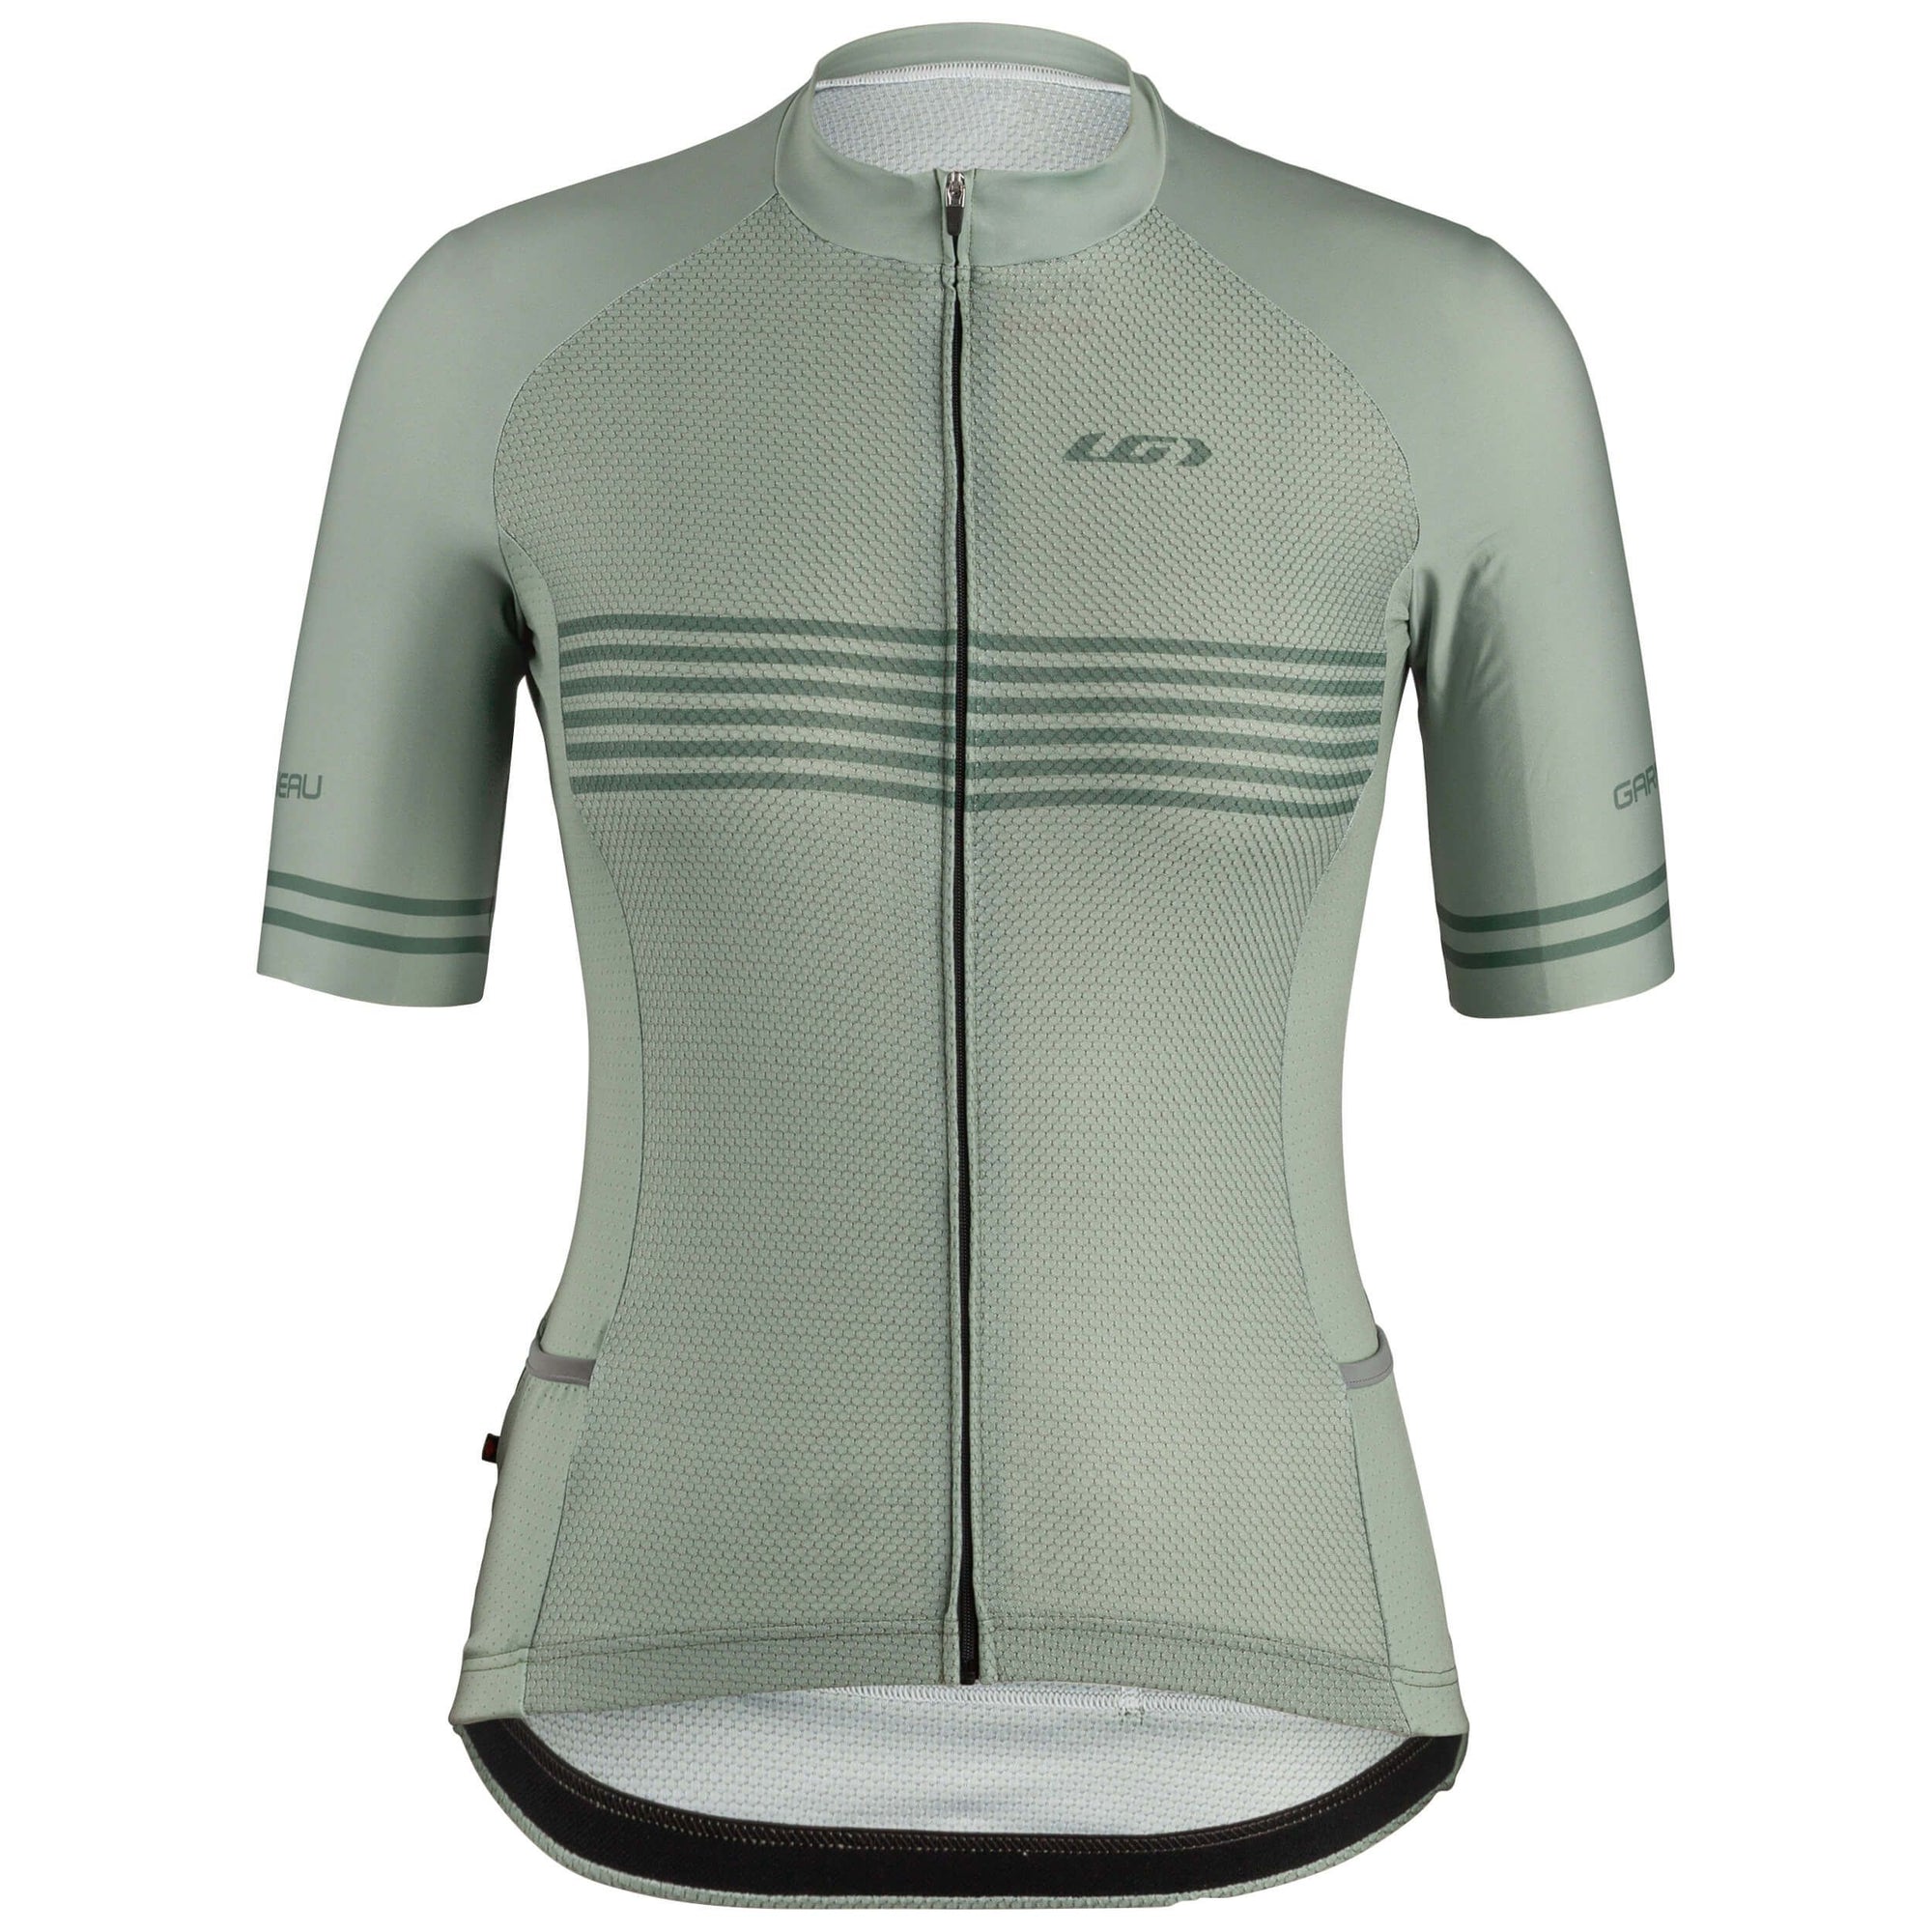 W'S Course Air Jersey - Grey Linght, XS